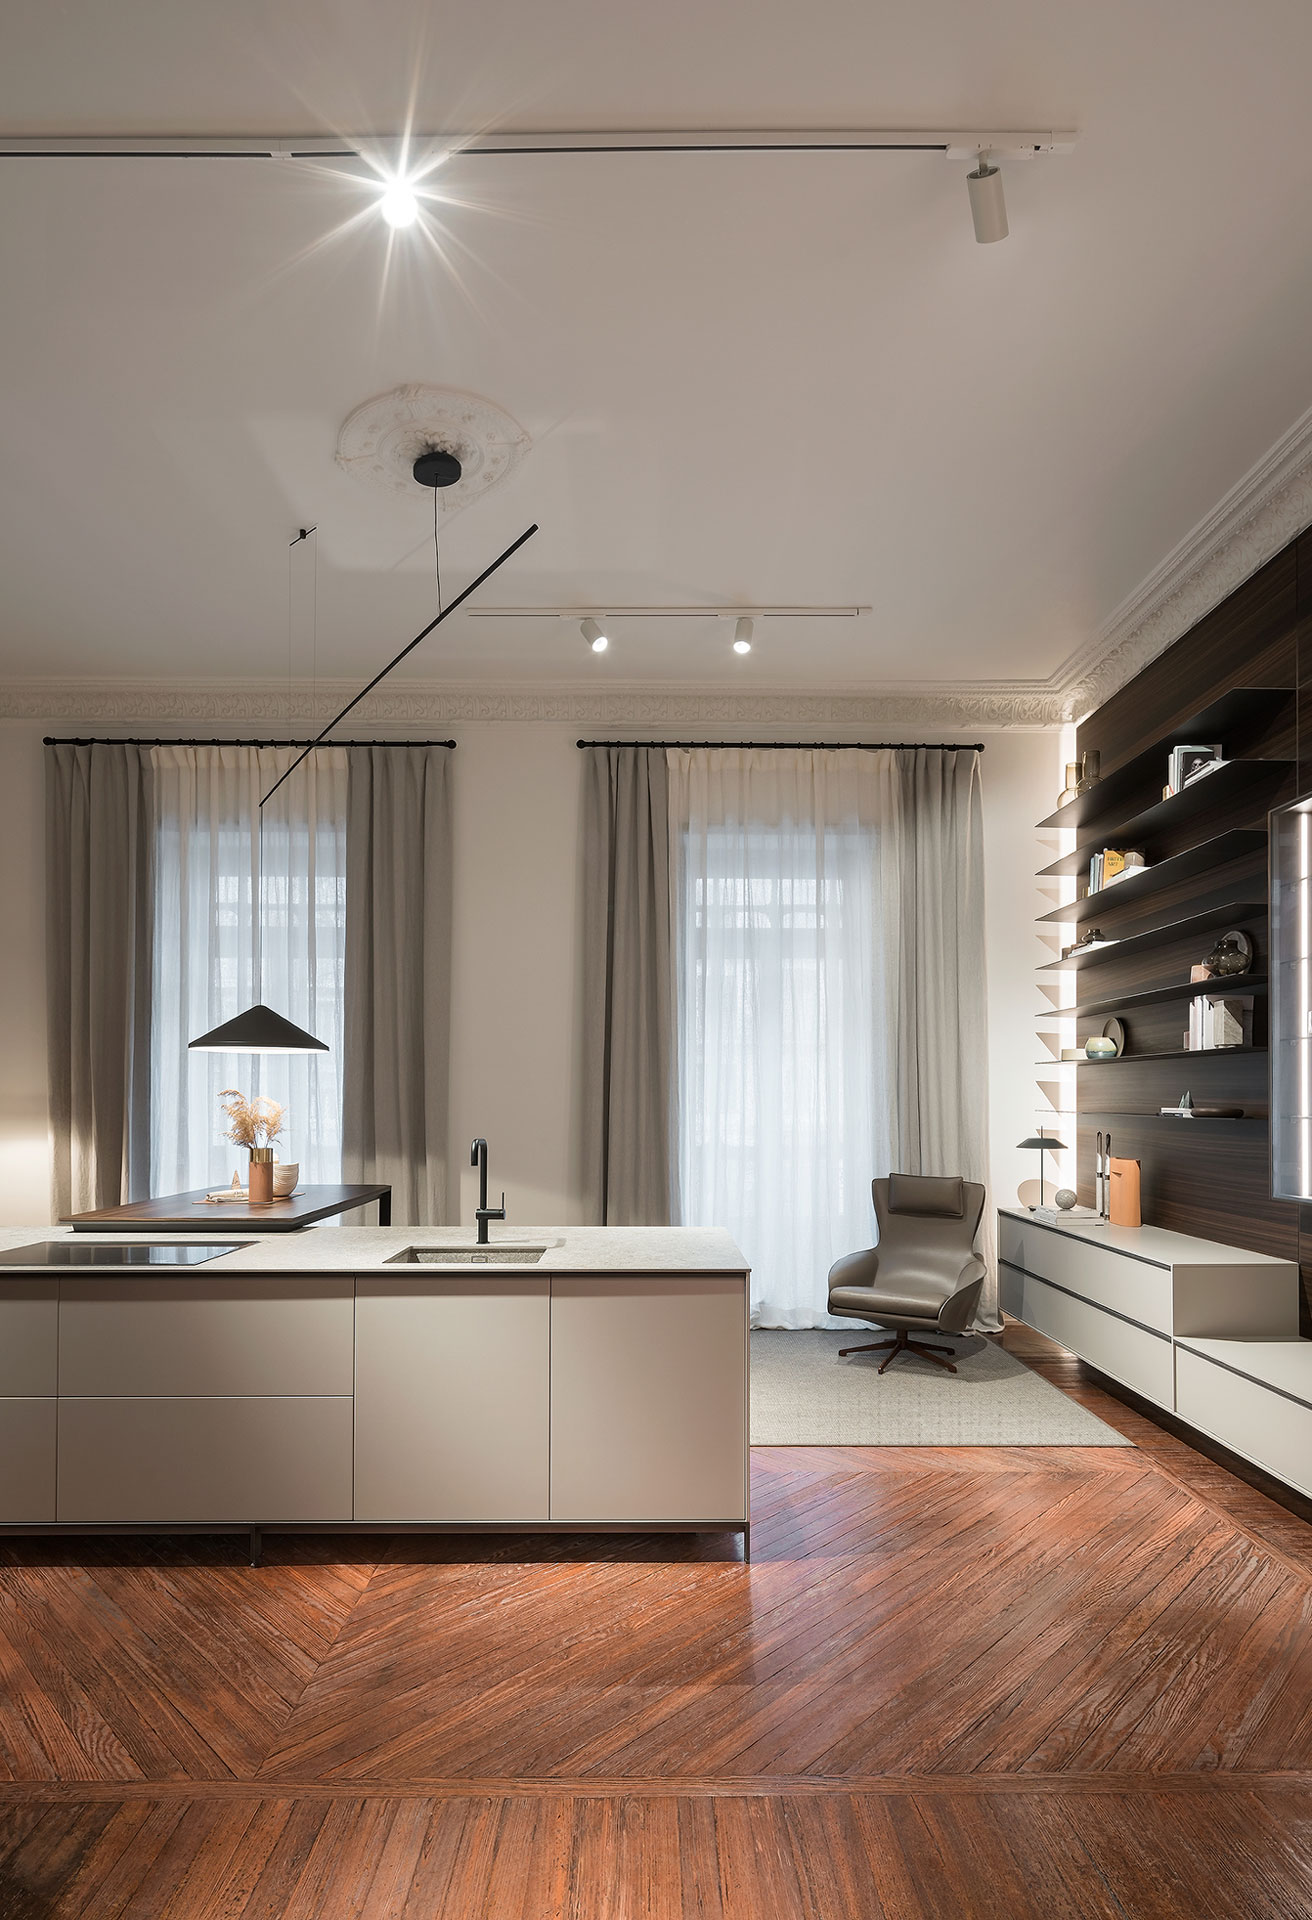 Vibia The Edit - Vibia Lighting Takes Centre Stage in Kitchen Designs - North